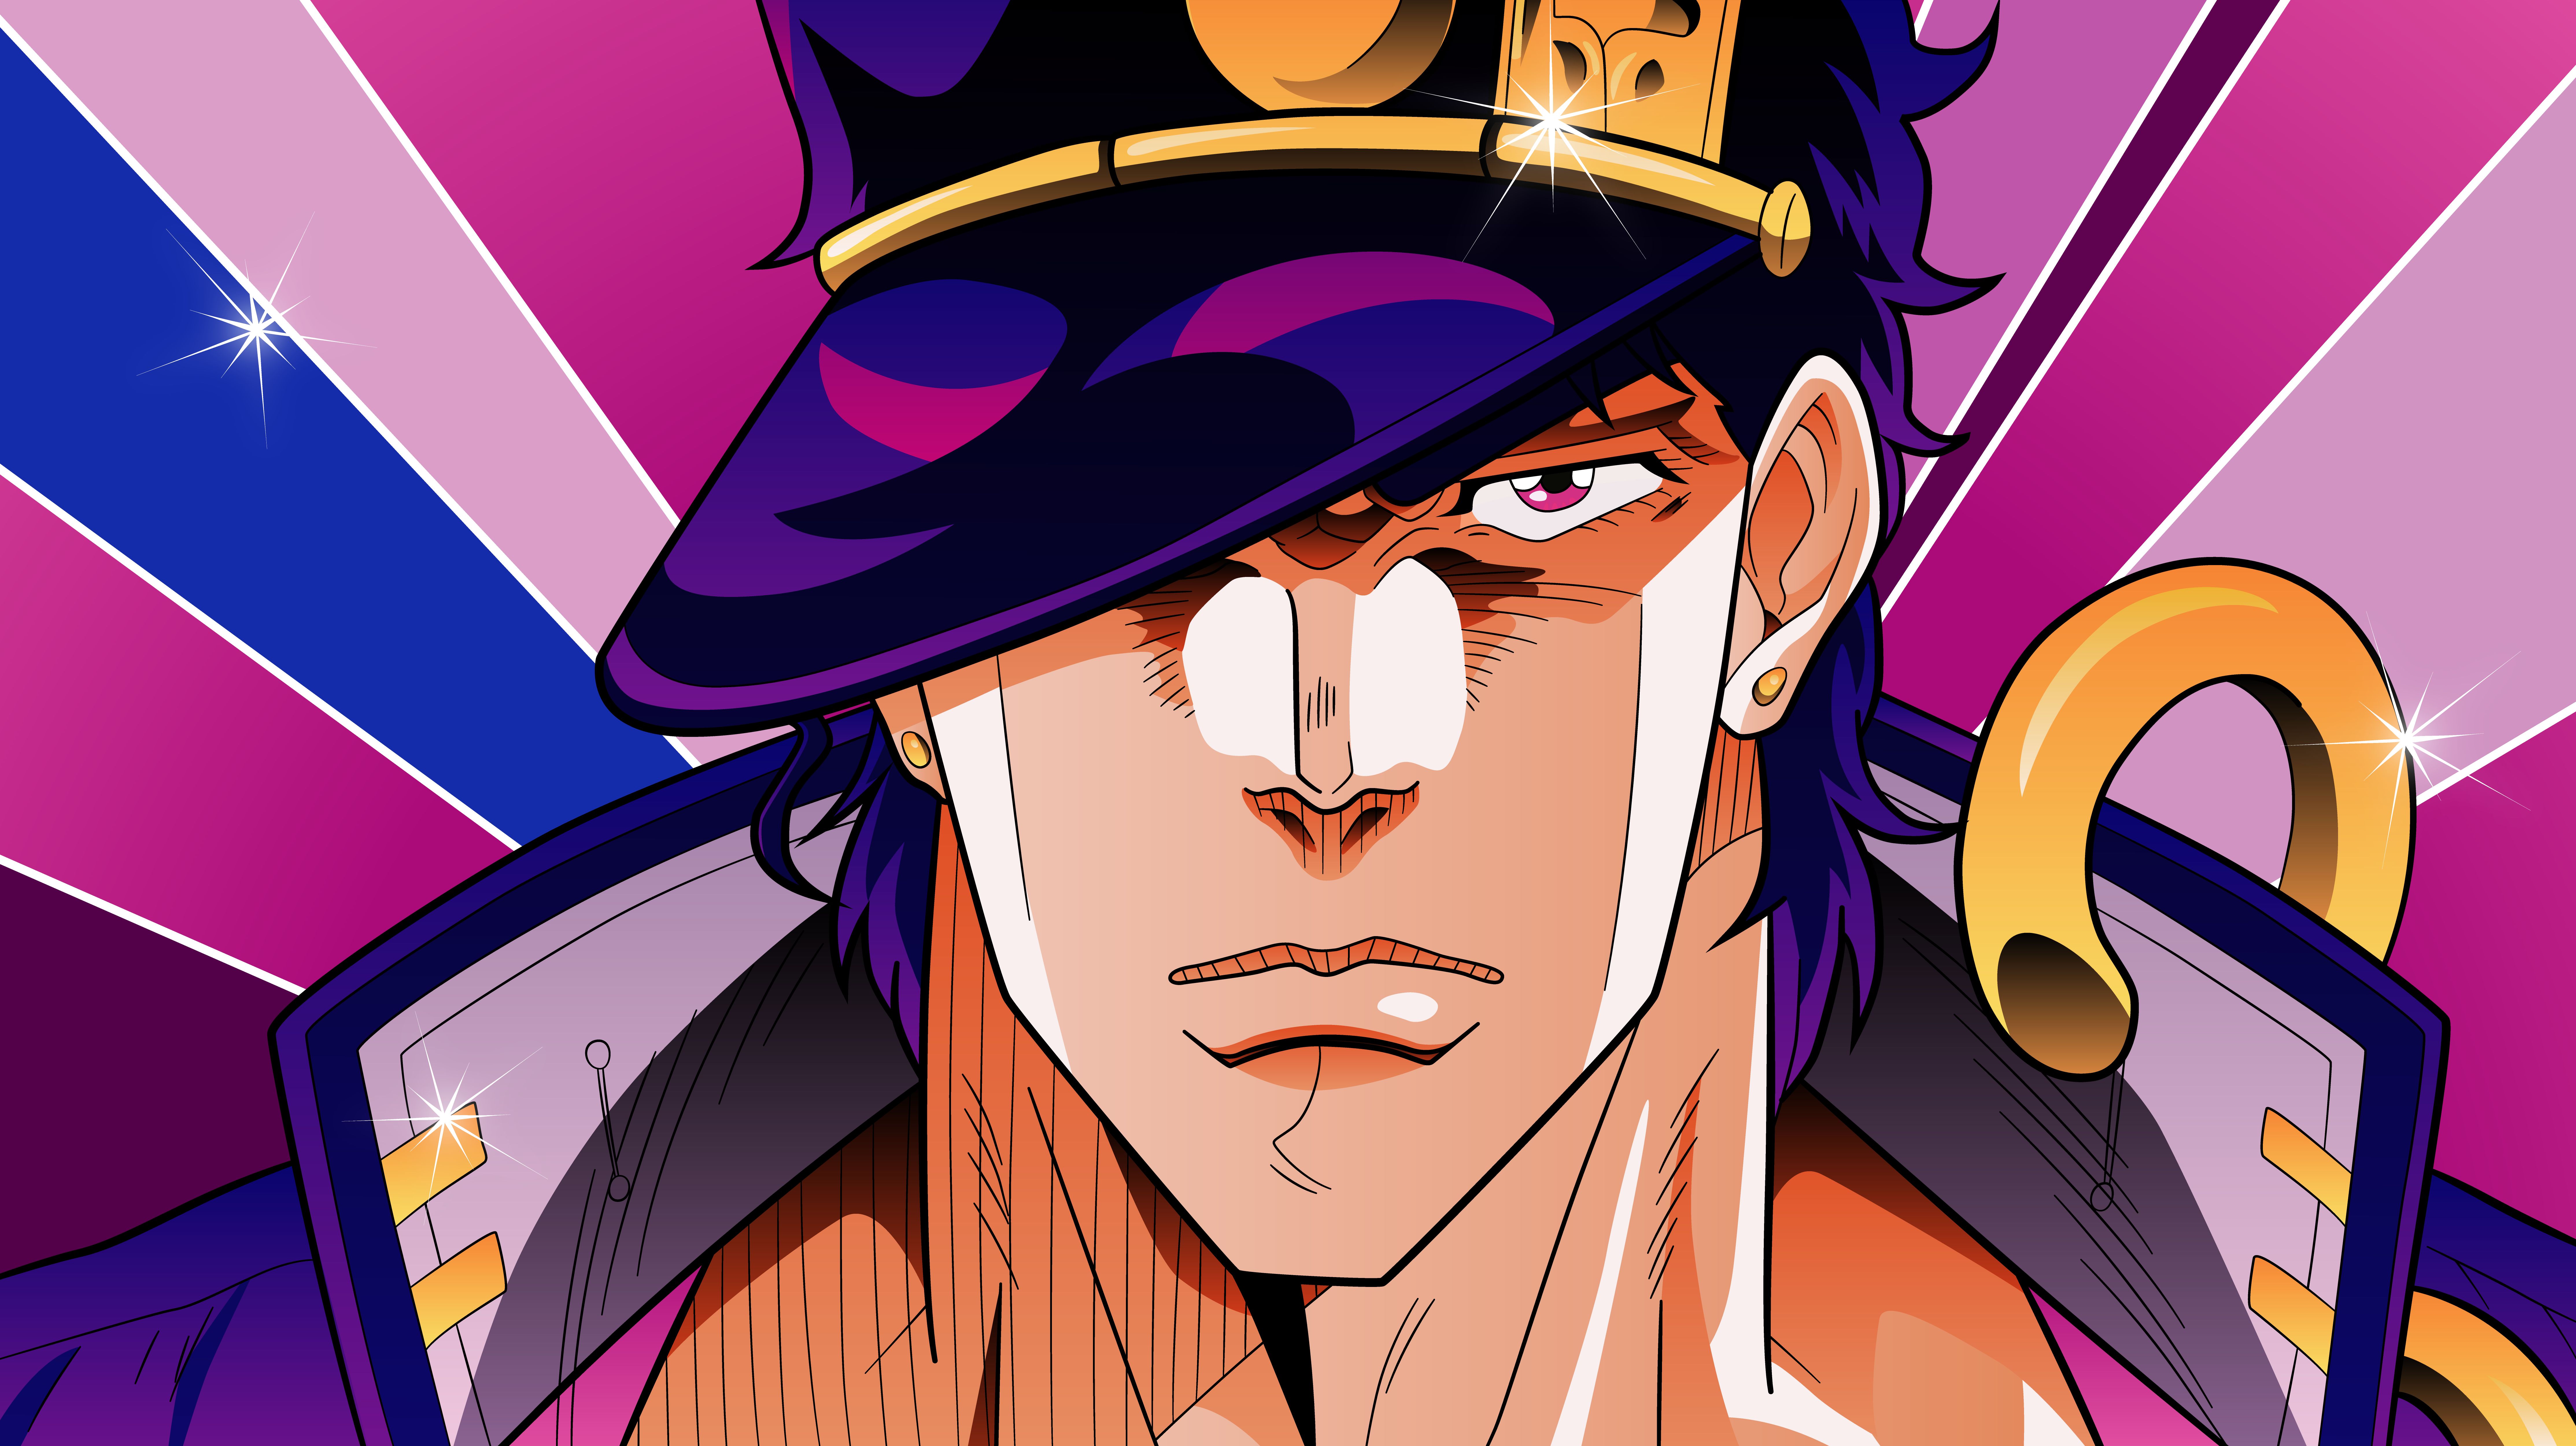 7 Jojo Killer Queen Wallpapers for iPhone and Android by Sara Byrd